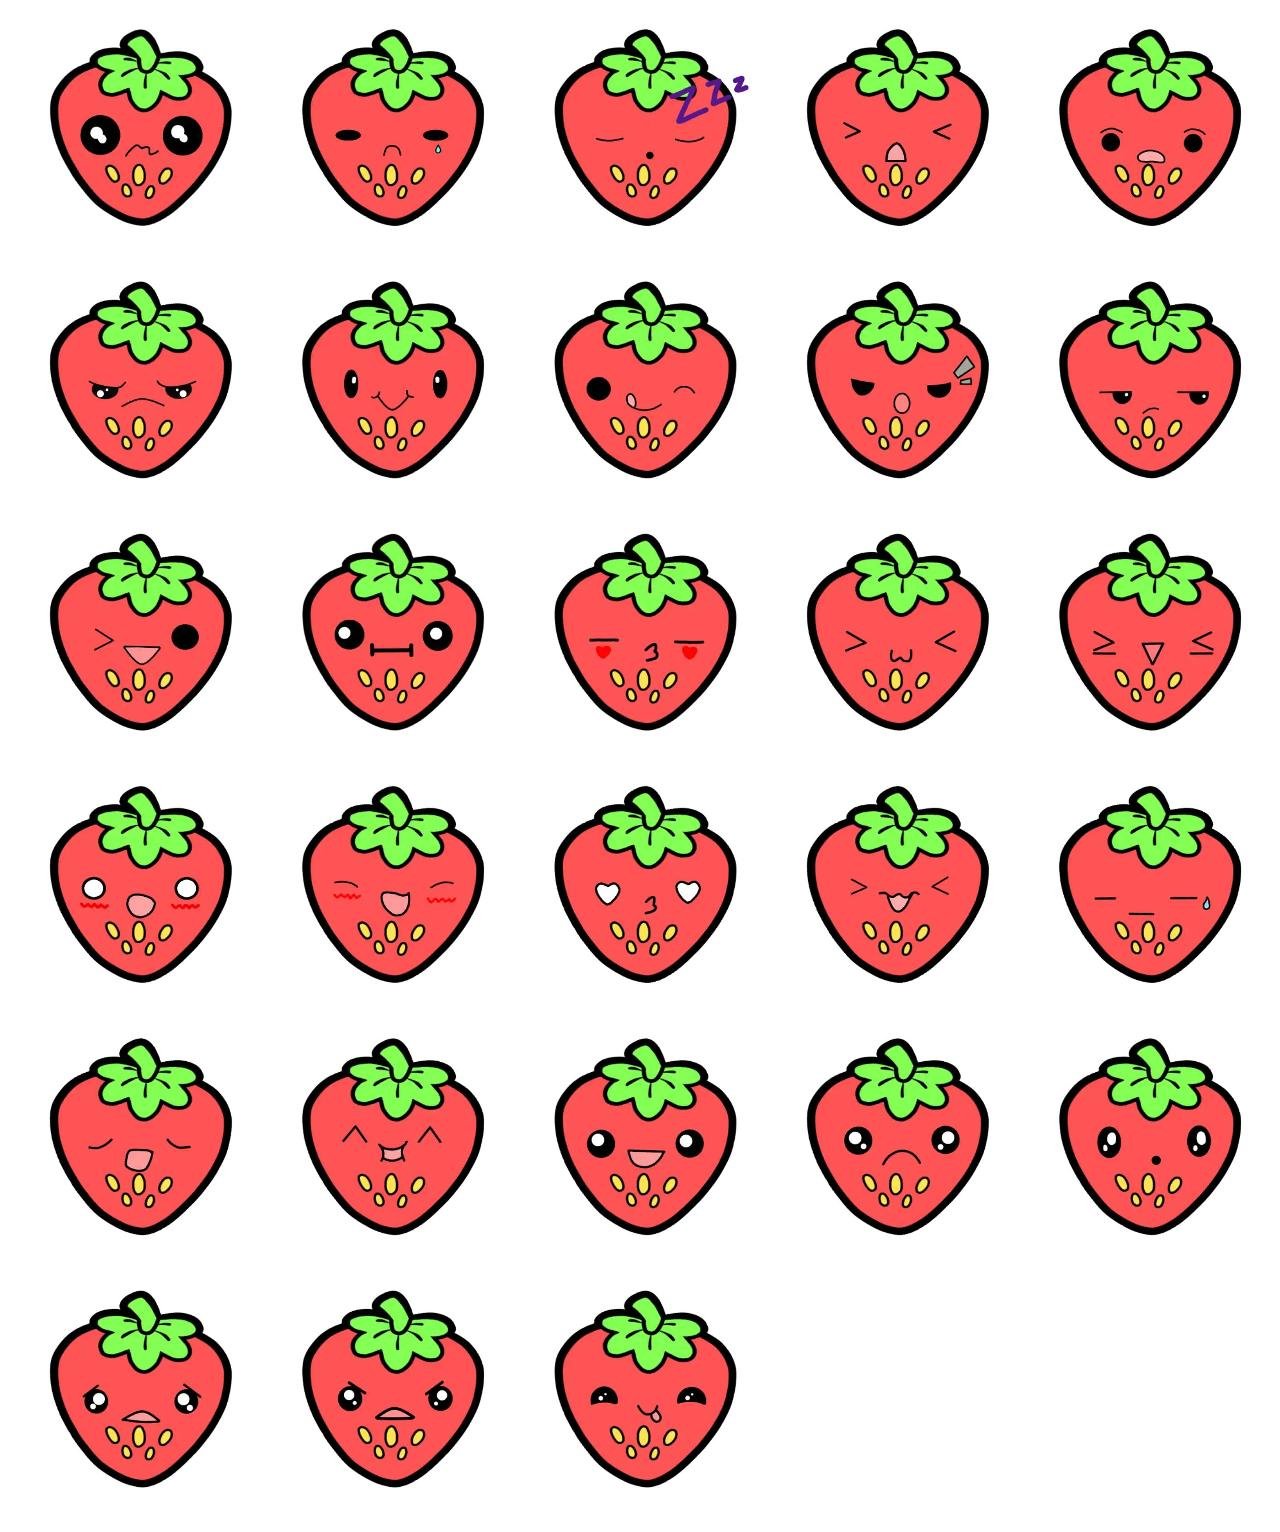 New Sweet Strawberry 1 Food/Drink,Etc. sticker pack for Whatsapp, Telegram, Signal, and others chatting and message apps